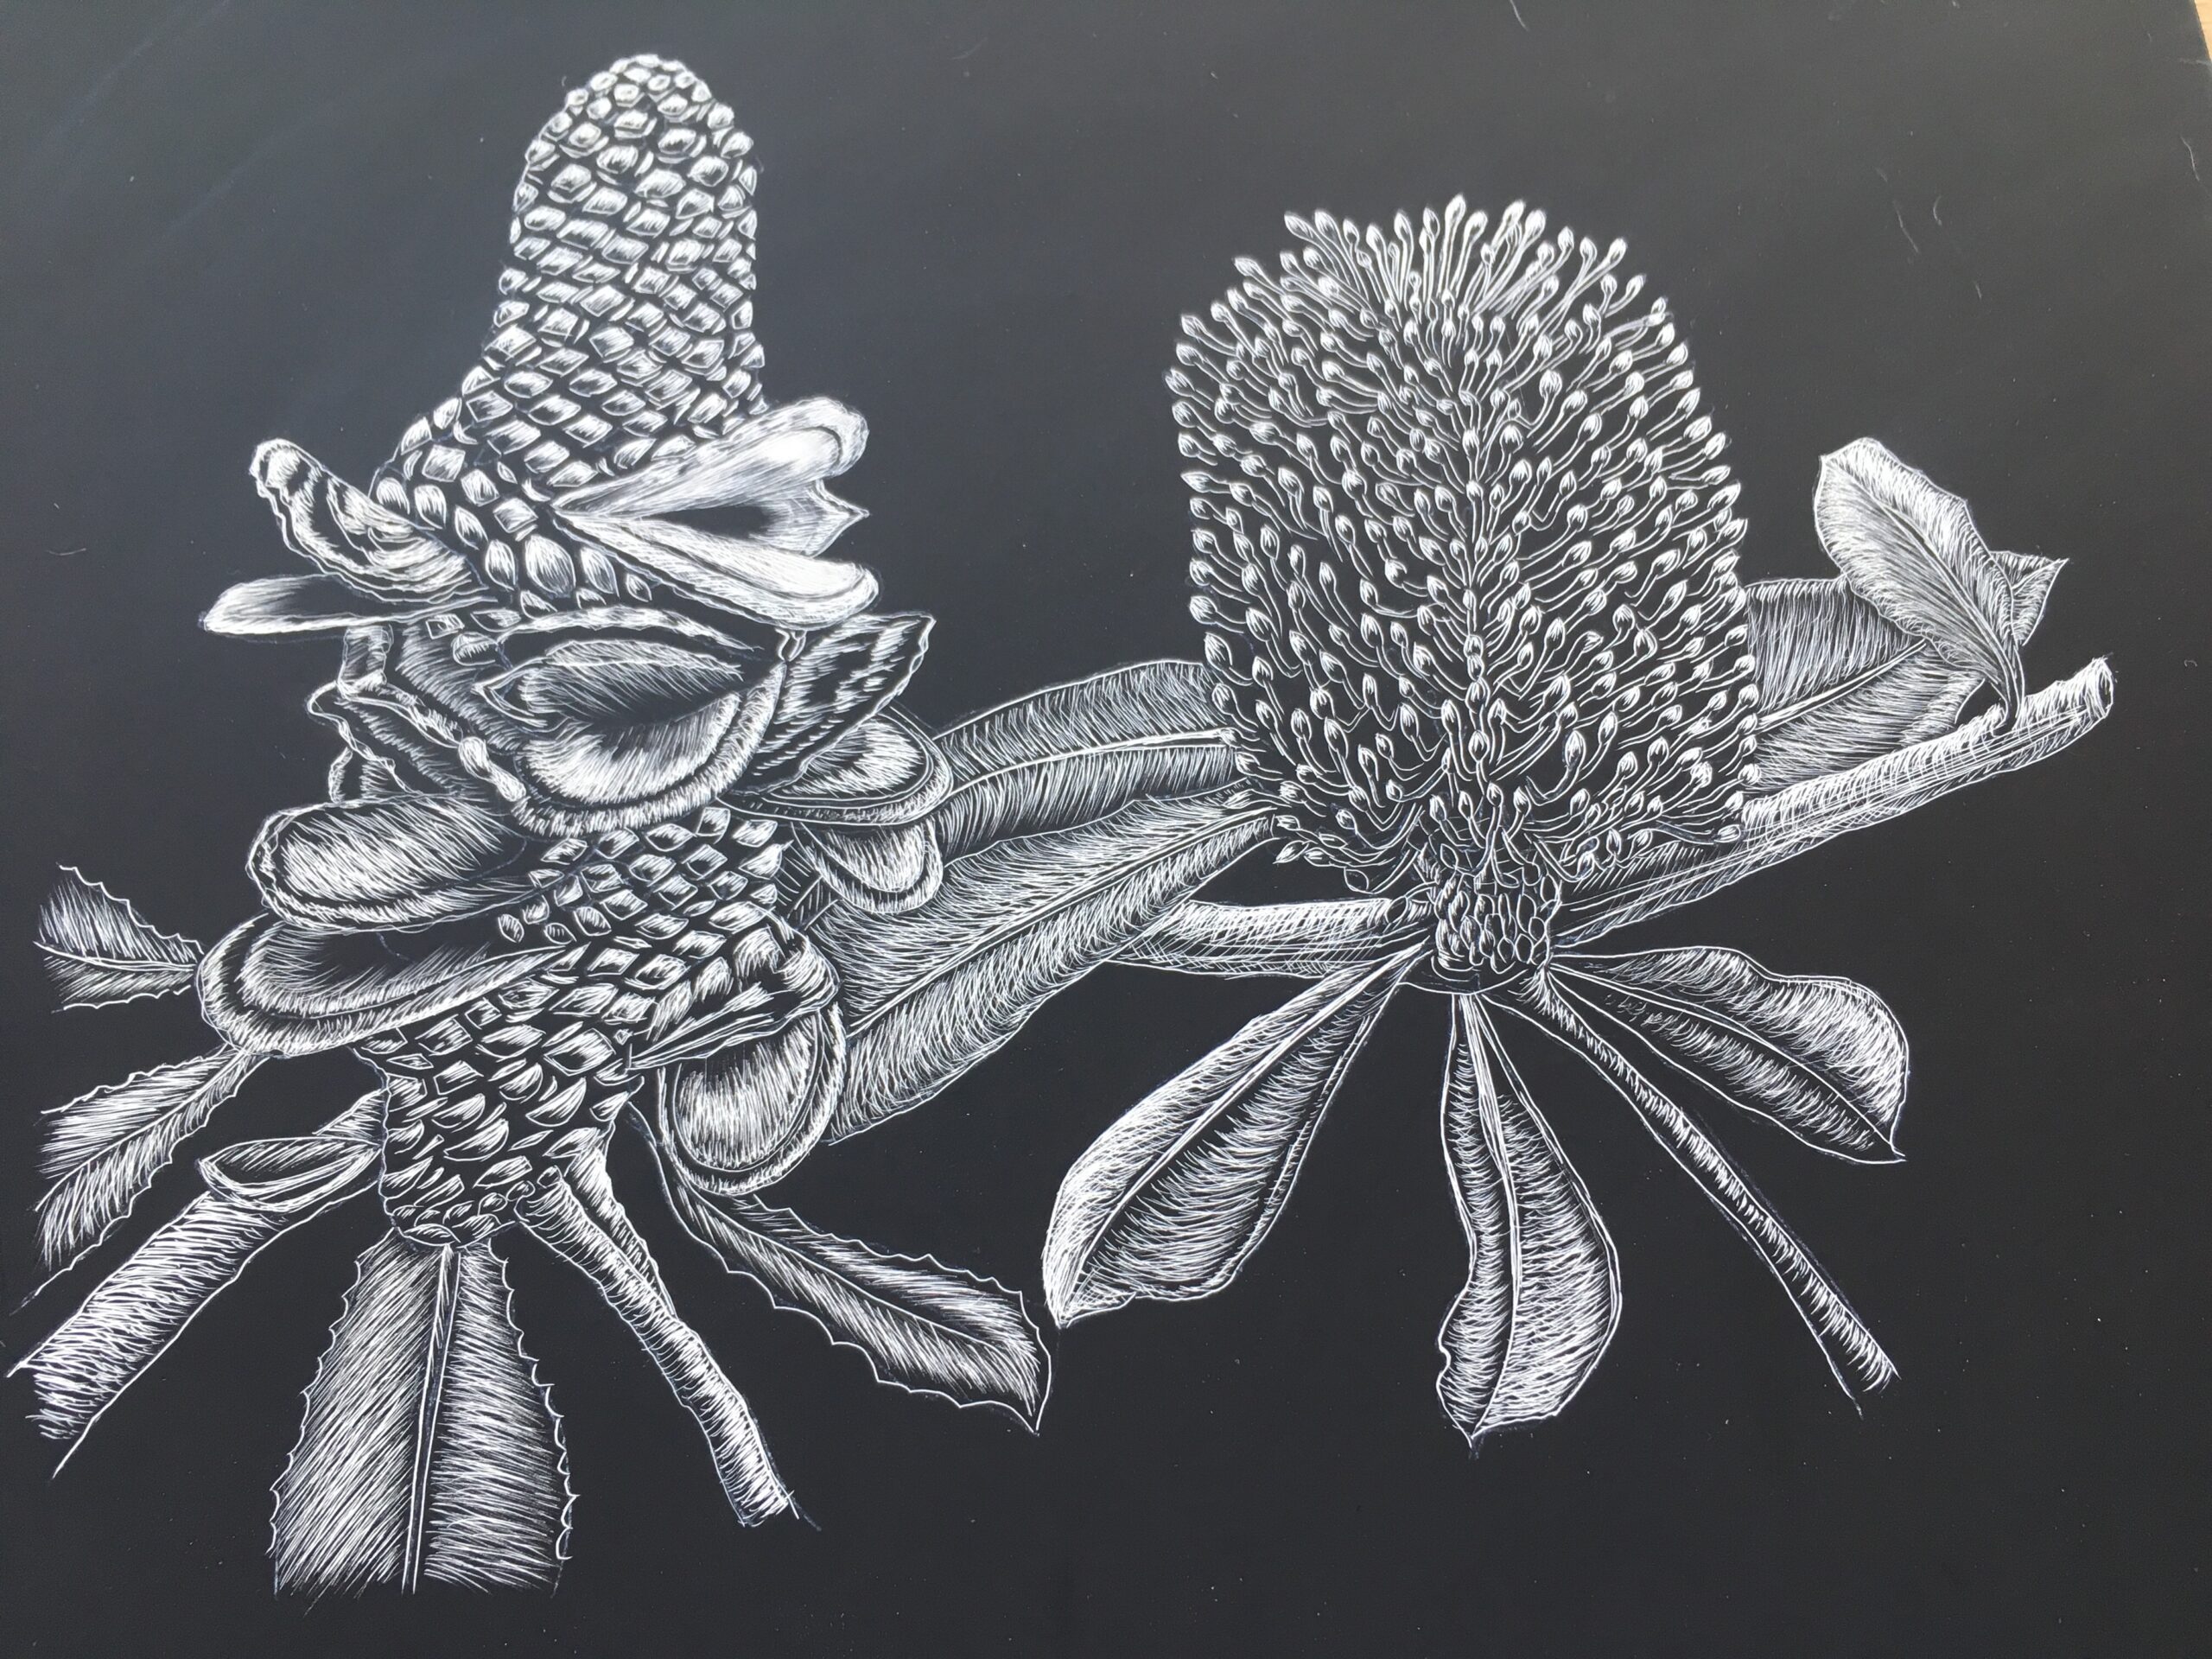 Image of banksias in seedpod and flower by Lynda Young in her Artist Profile story with Art Trails Tasmania